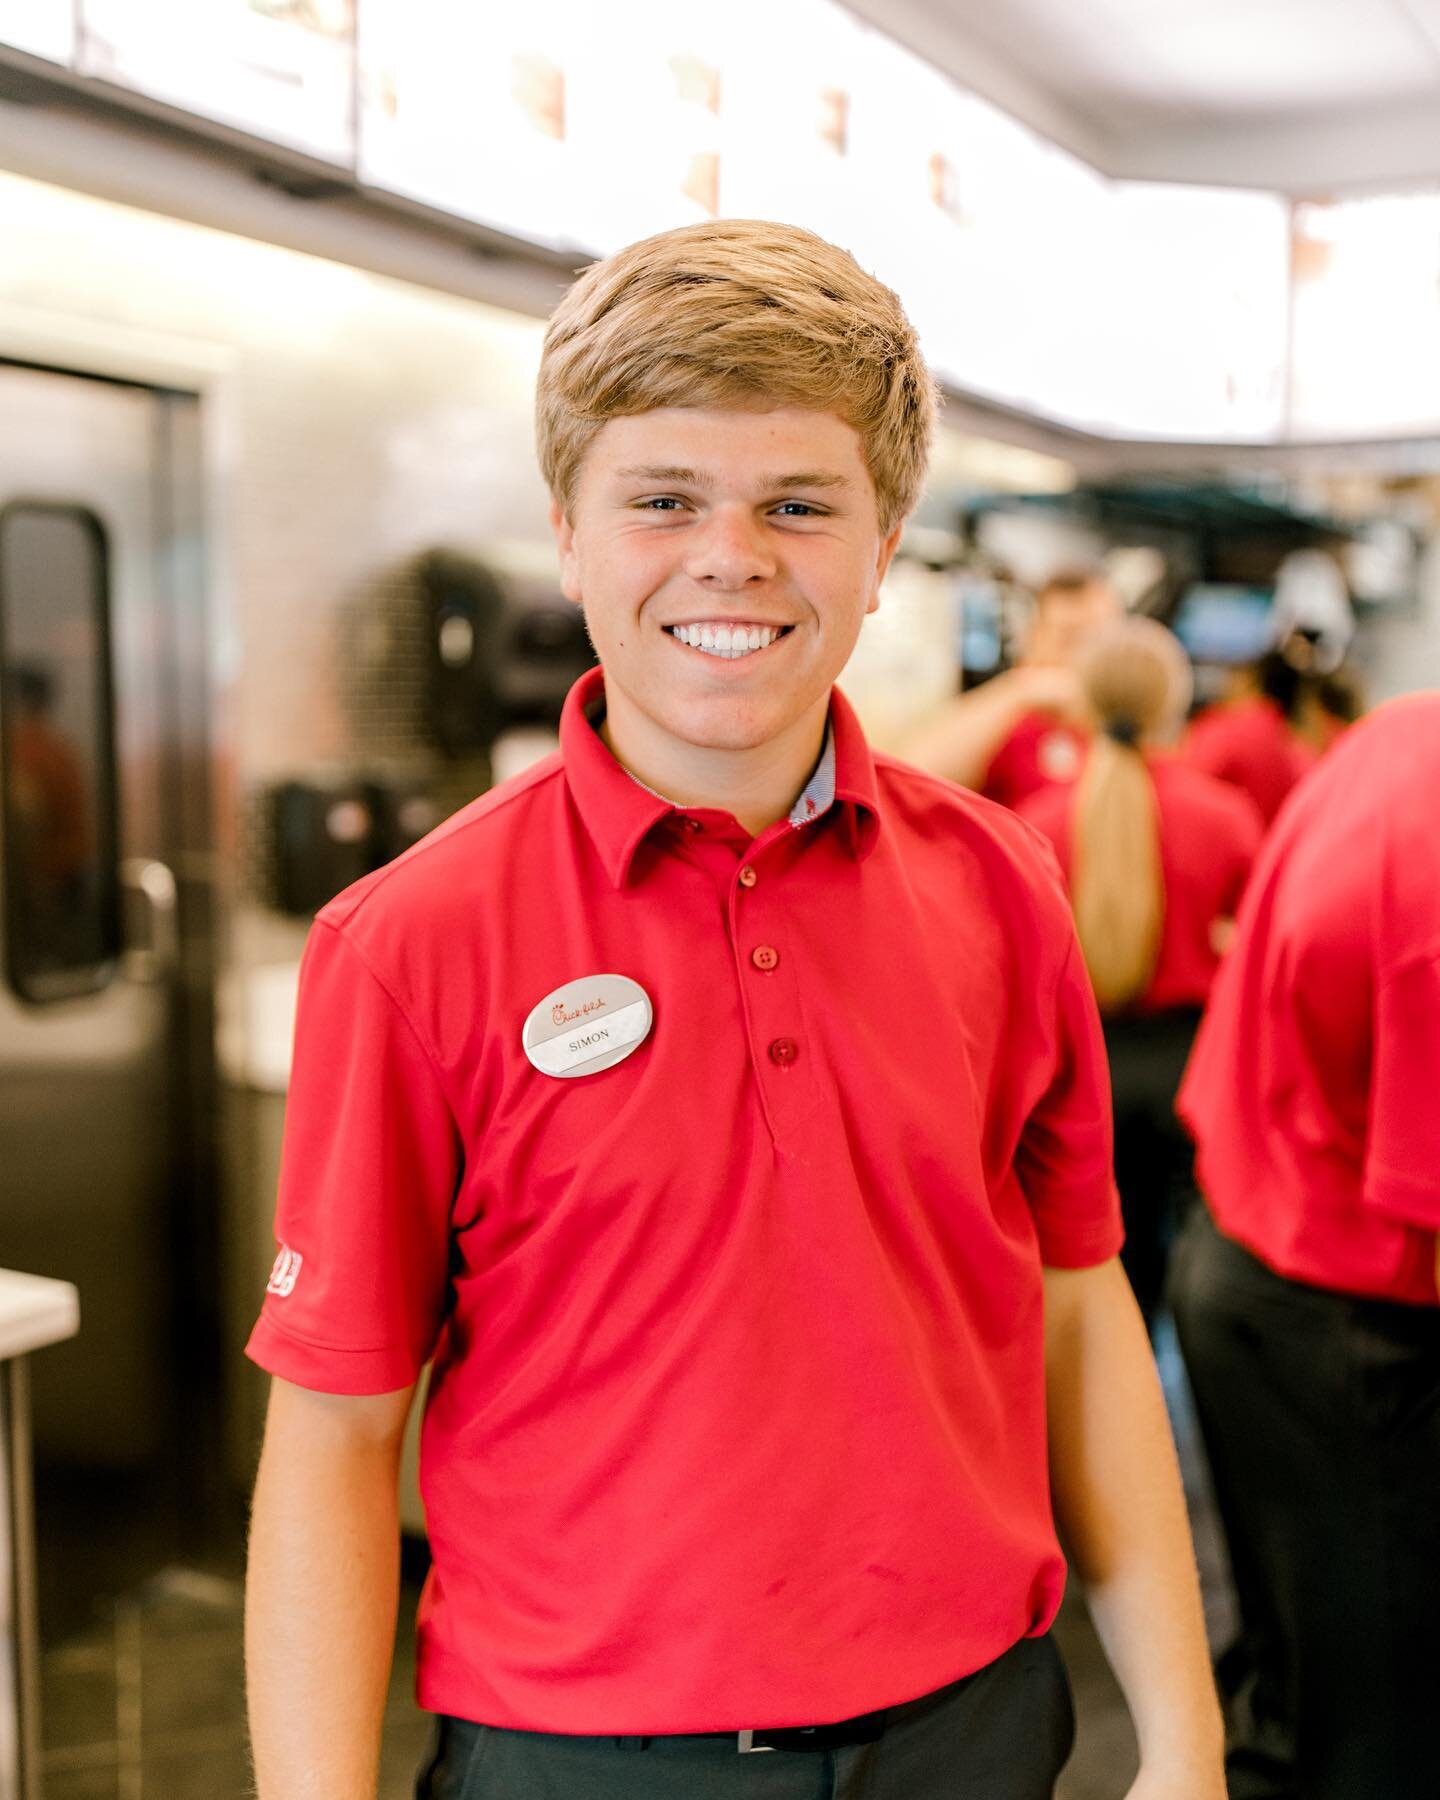 Happy Monday from Simon! 👋 BTW: Do you have our CFA One App?! We just sent out 500 free peach milkshakes 🍑 We love treating our App members! ❤️ Download our free App and scan it at every CFA visit to earn points towards free food!